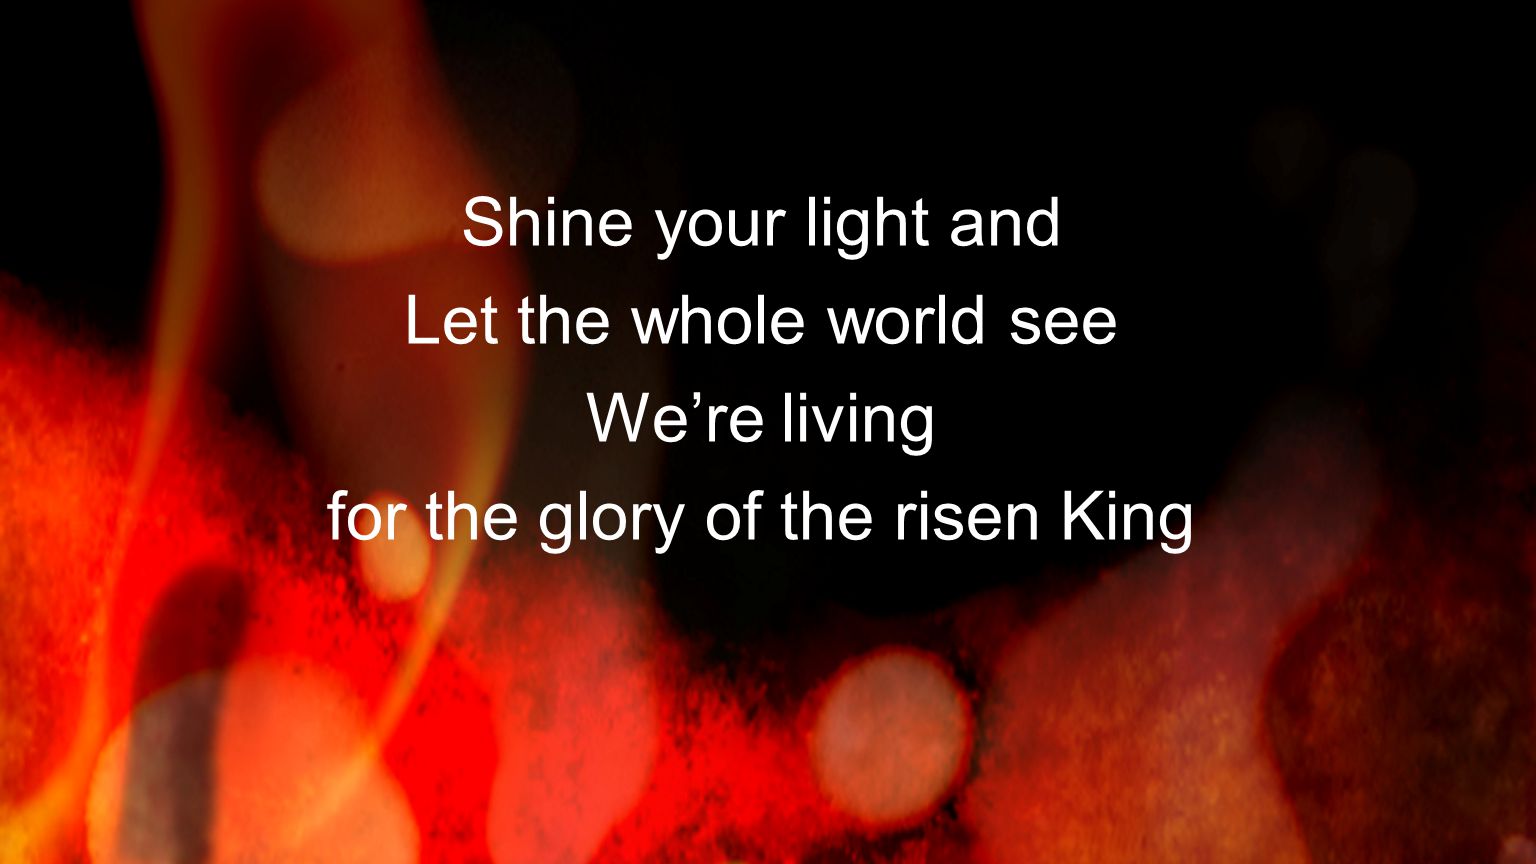 for the glory of the risen King